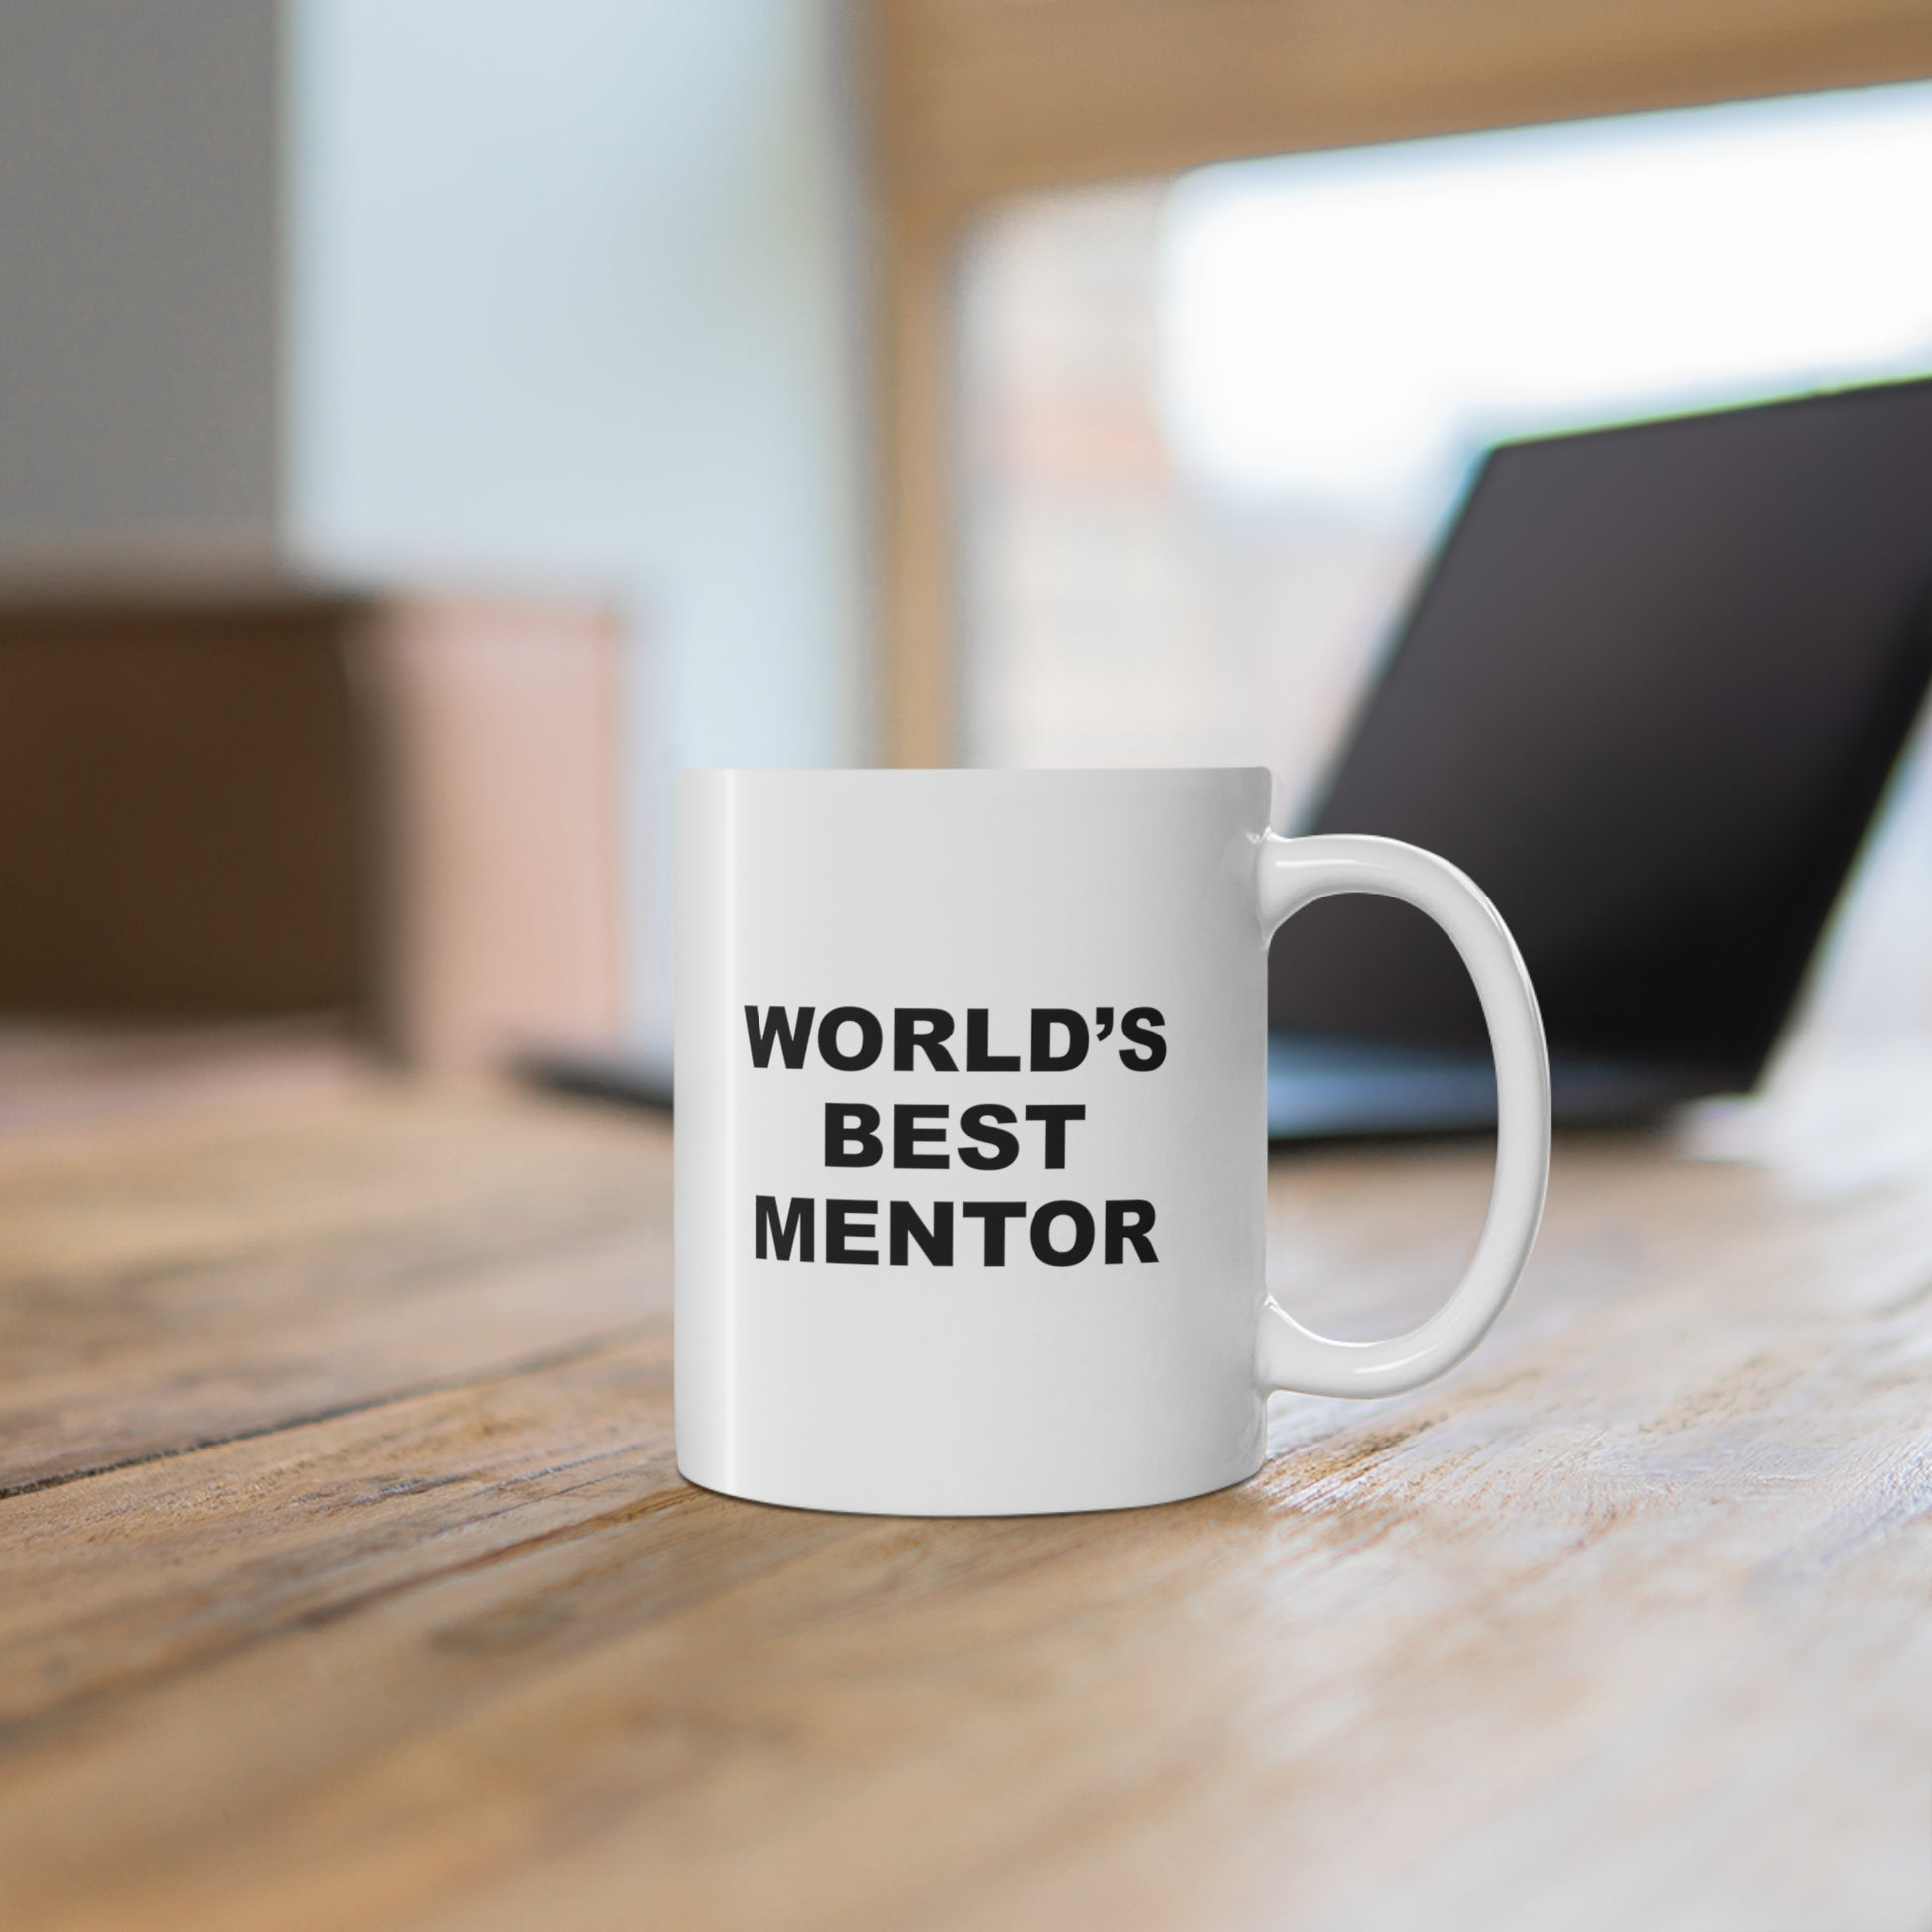 11oz ceramic mug with quote World's Best Mentor